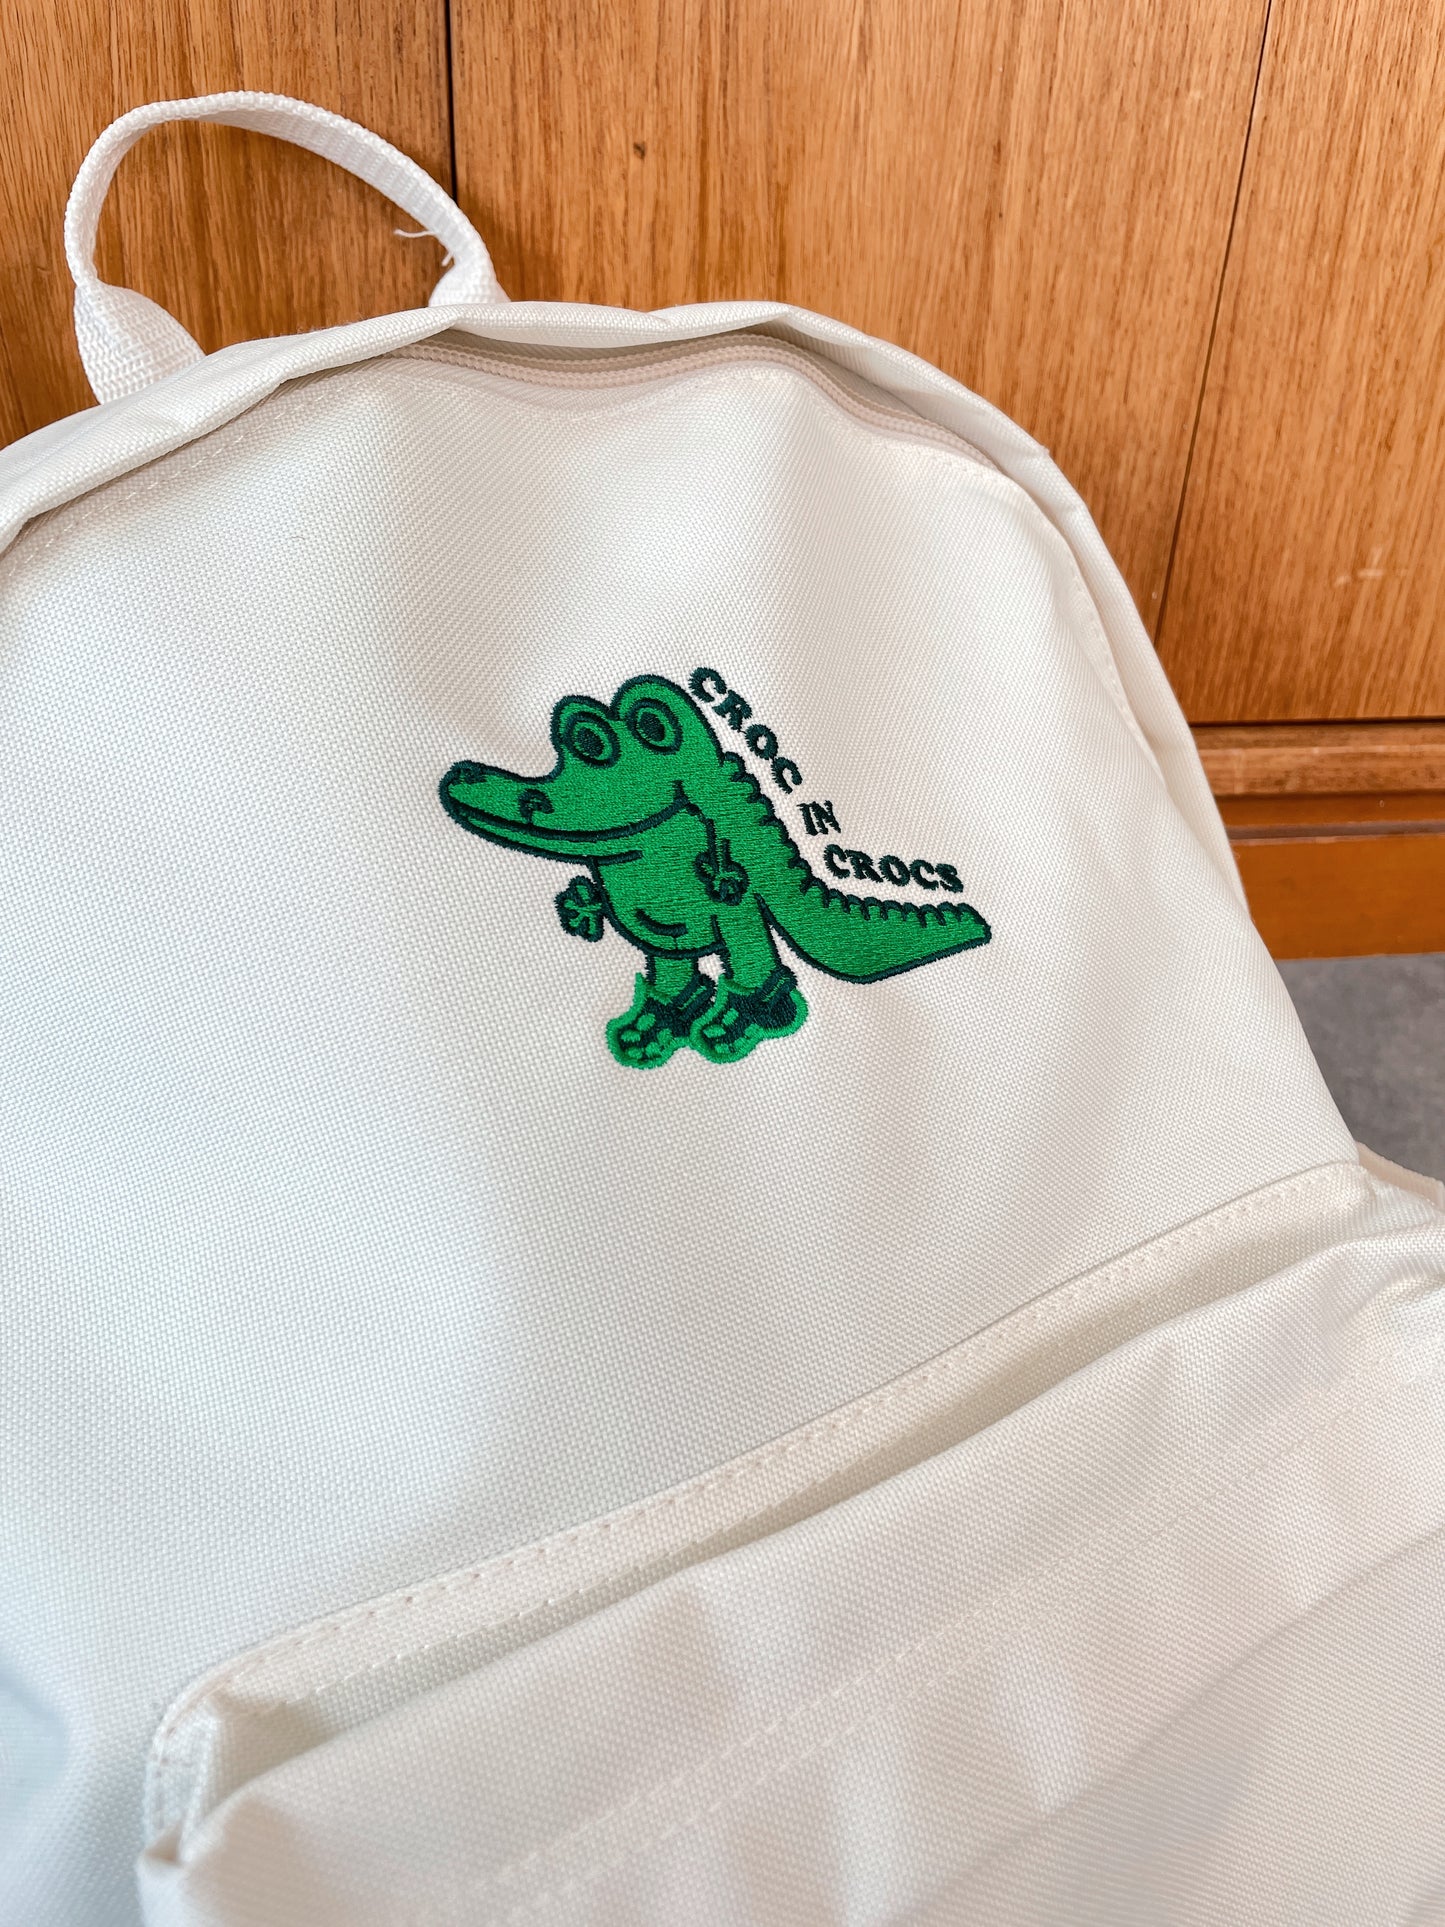 Other Side Store 'Crocs' Embroidered Backpack - Ecru